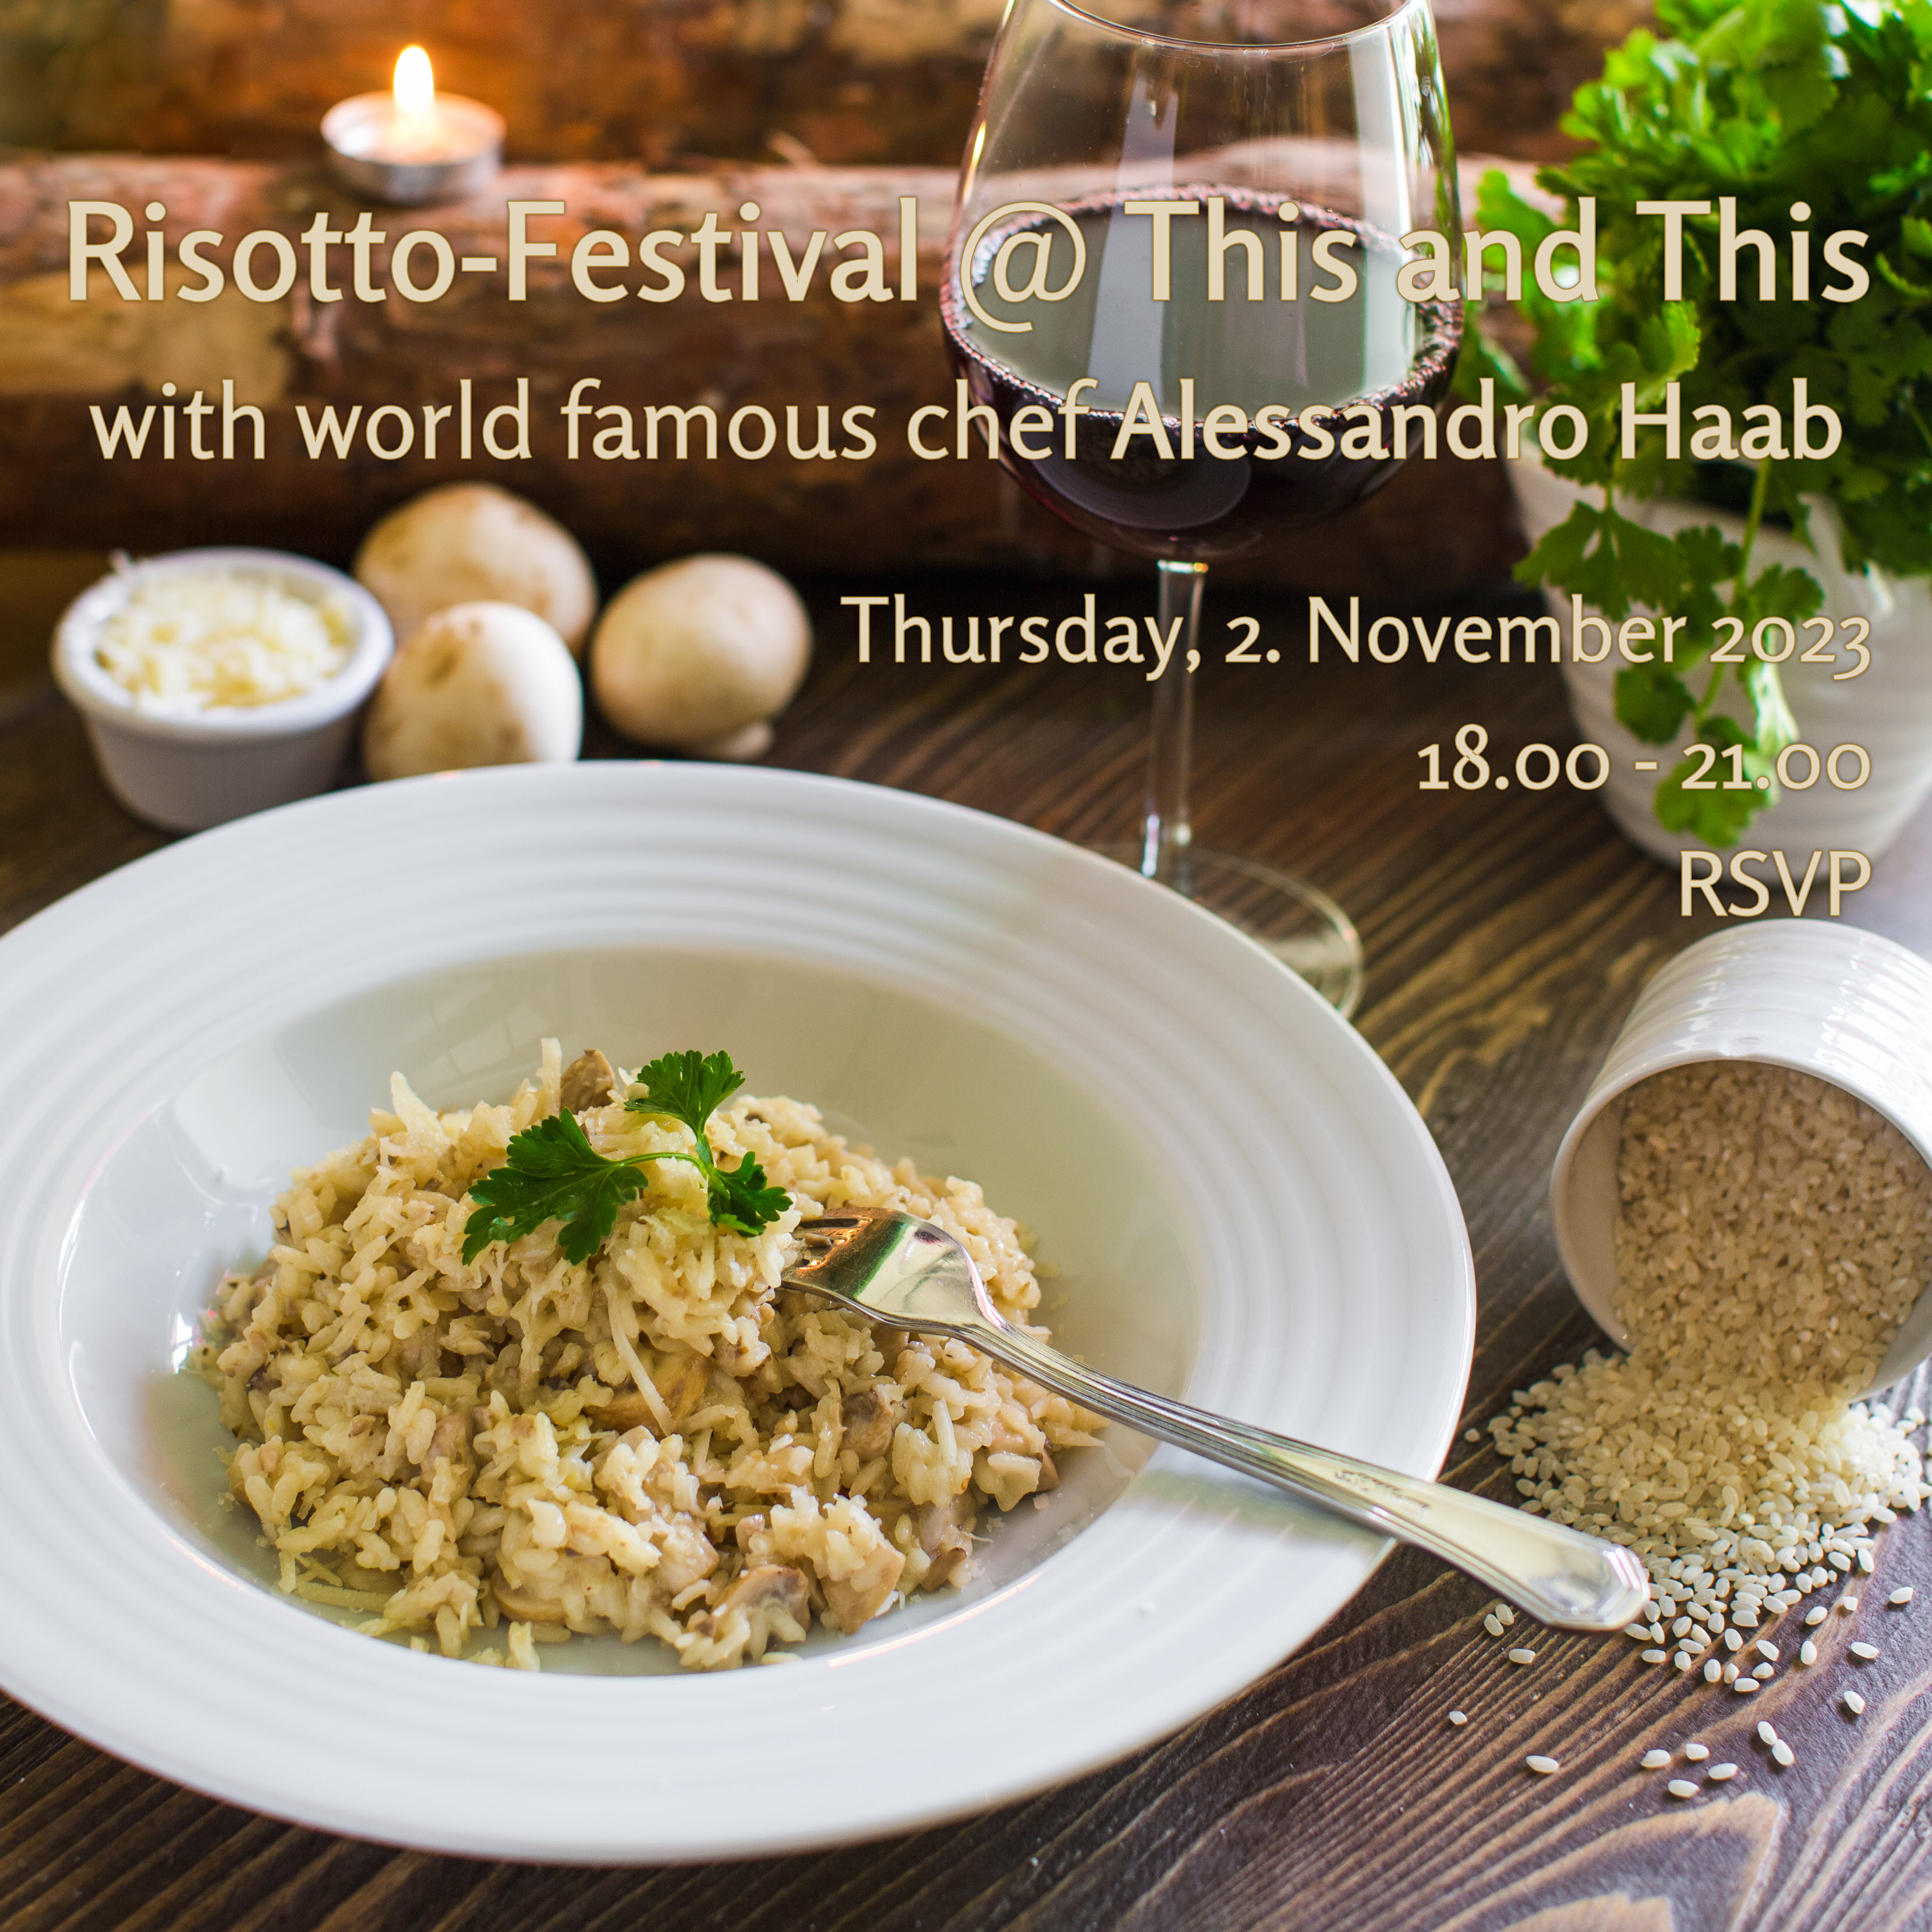 Risotto-Festival at This and This